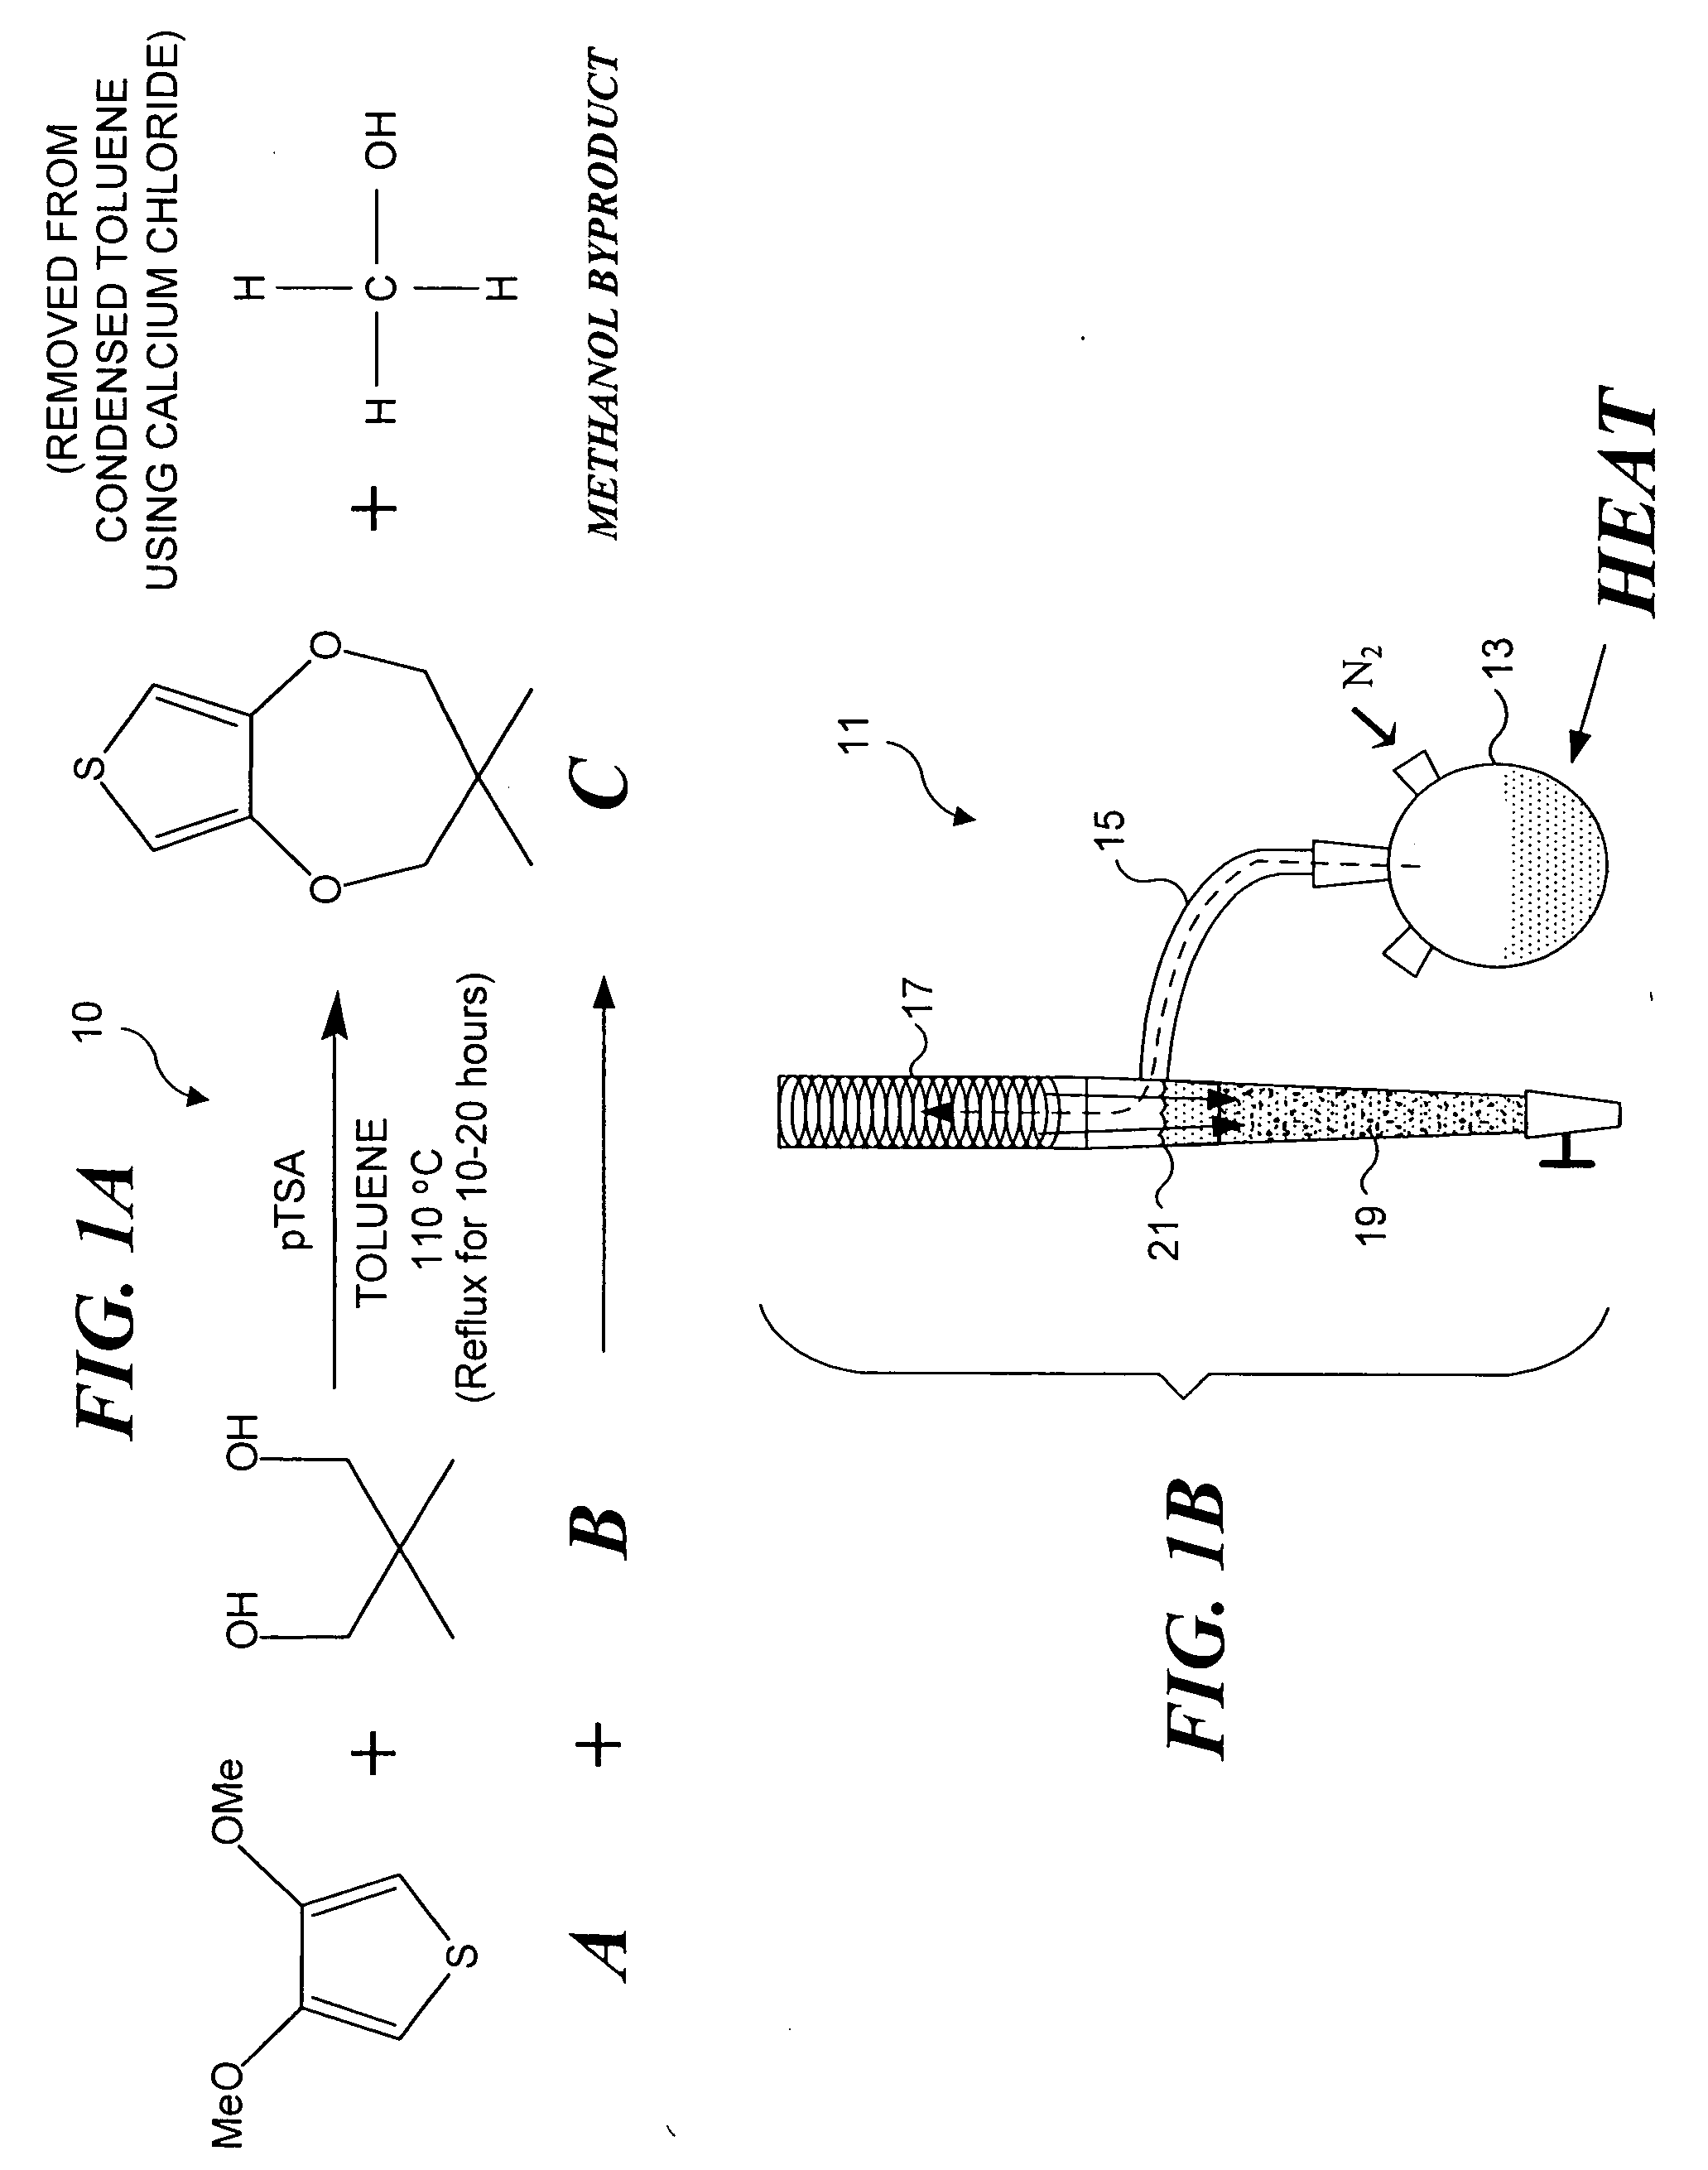 Electrochromic organic polymer synthesis and devices utilizing electrochromic organic polymers